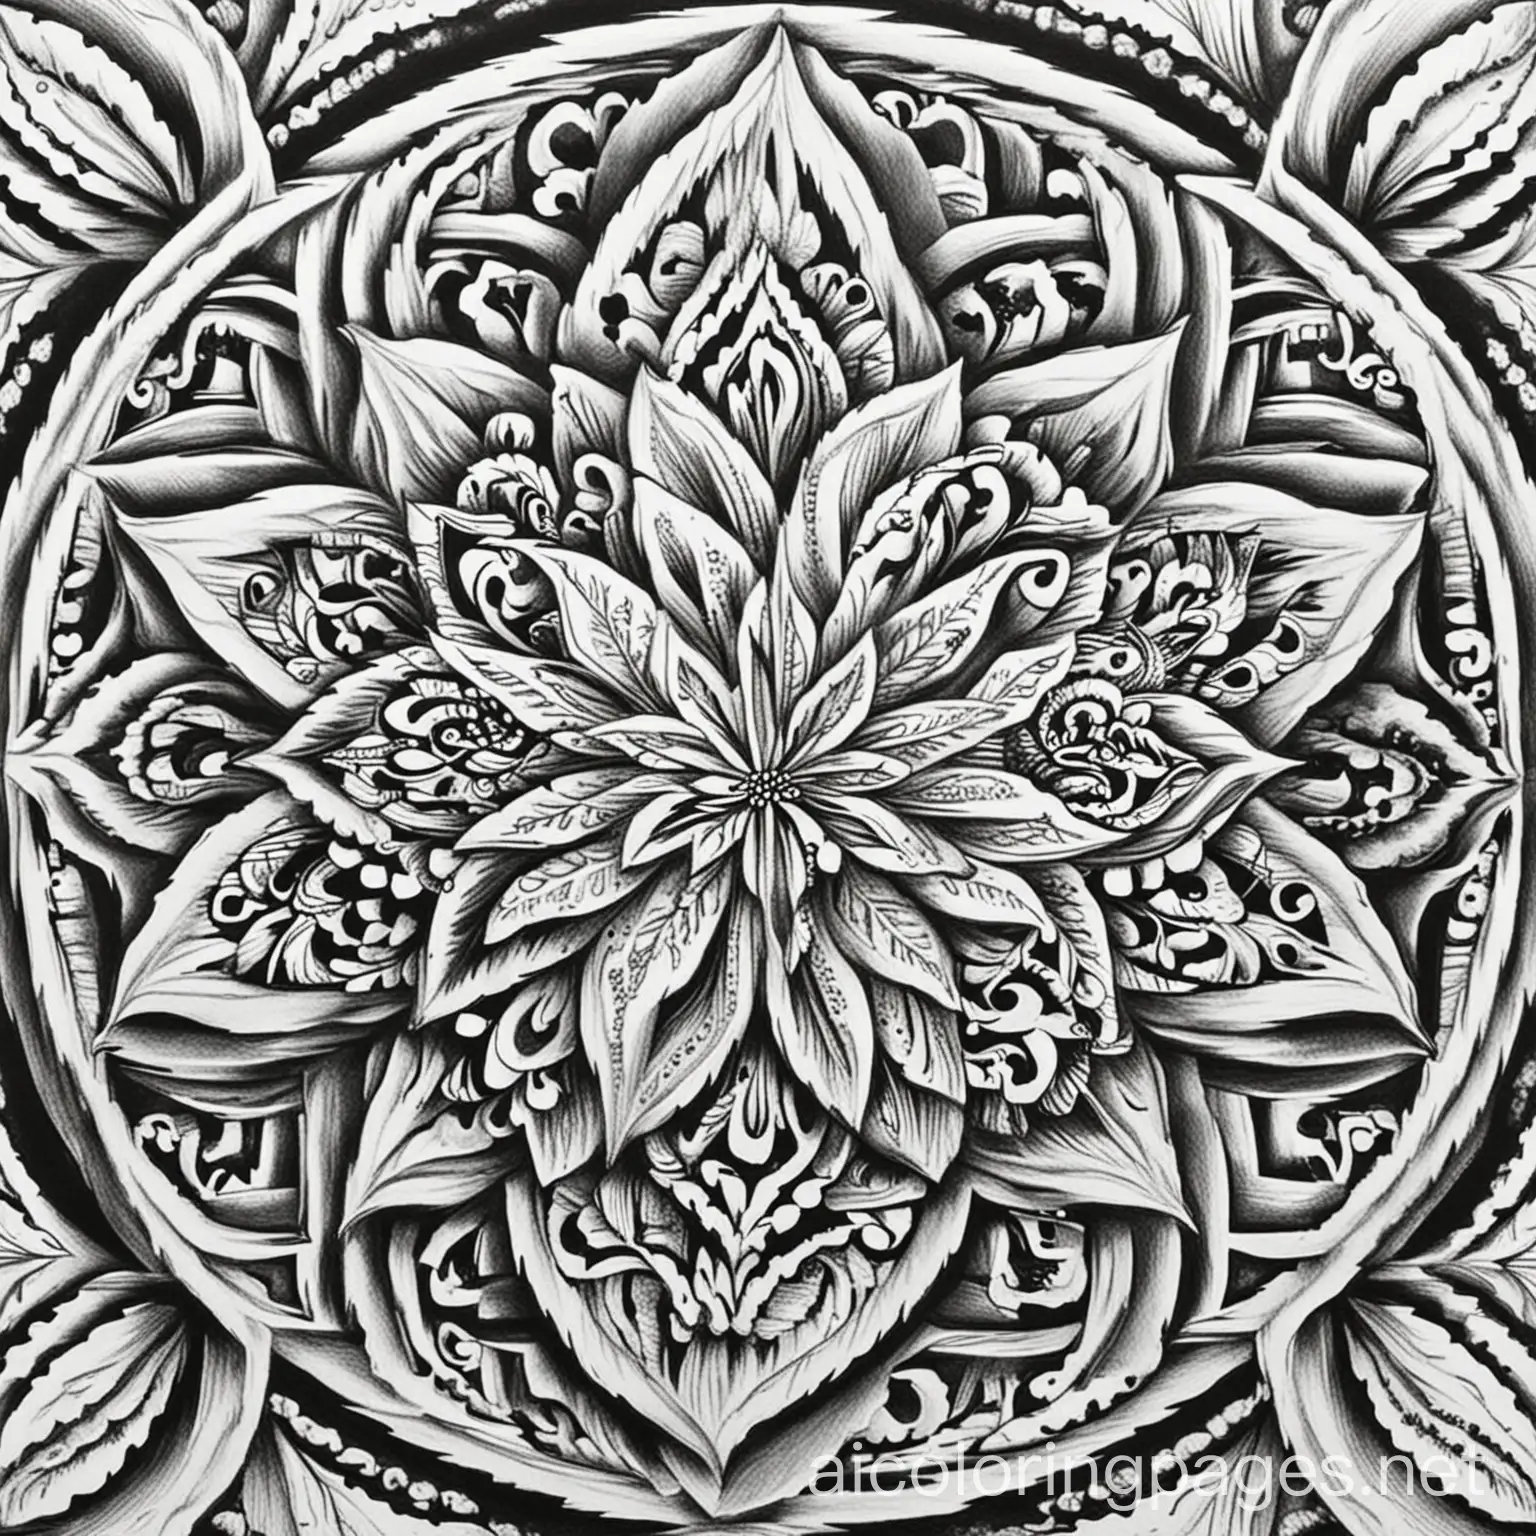 bold and easy 
mandala flower pattern black and white, Coloring Page, black and white, line art, white background, Simplicity, Ample White Space. The background of the coloring page is plain white to make it easy for young children to color within the lines. The outlines of all the subjects are easy to distinguish, making it simple for kids to color without too much difficulty